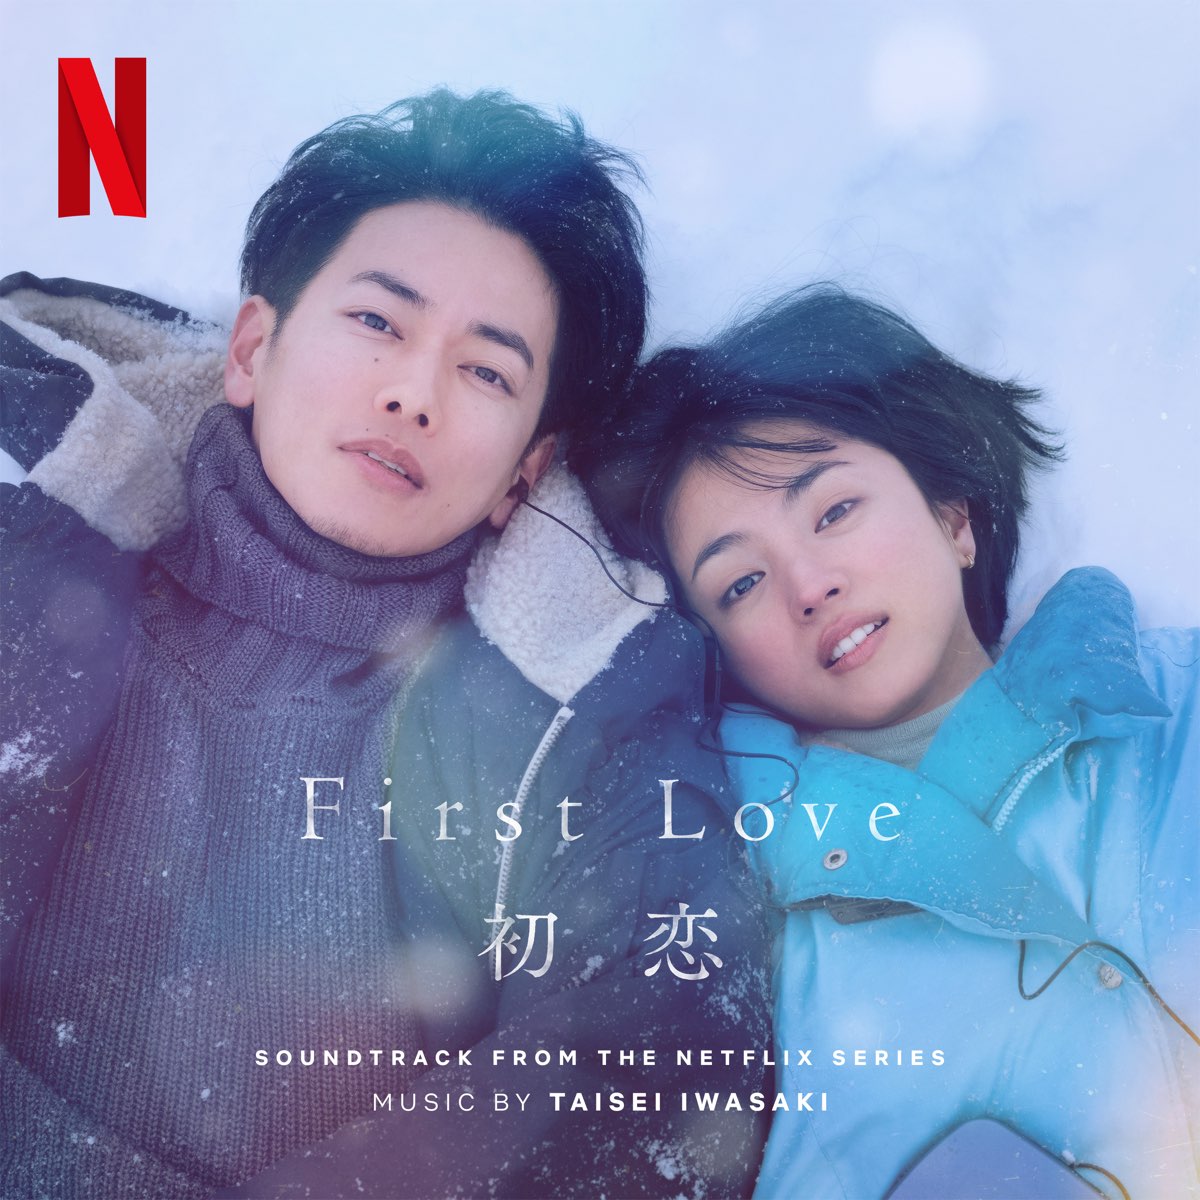 first-love-soundtrack-from-the-netflix-series-by-taisei-iwasaki-on-apple-music